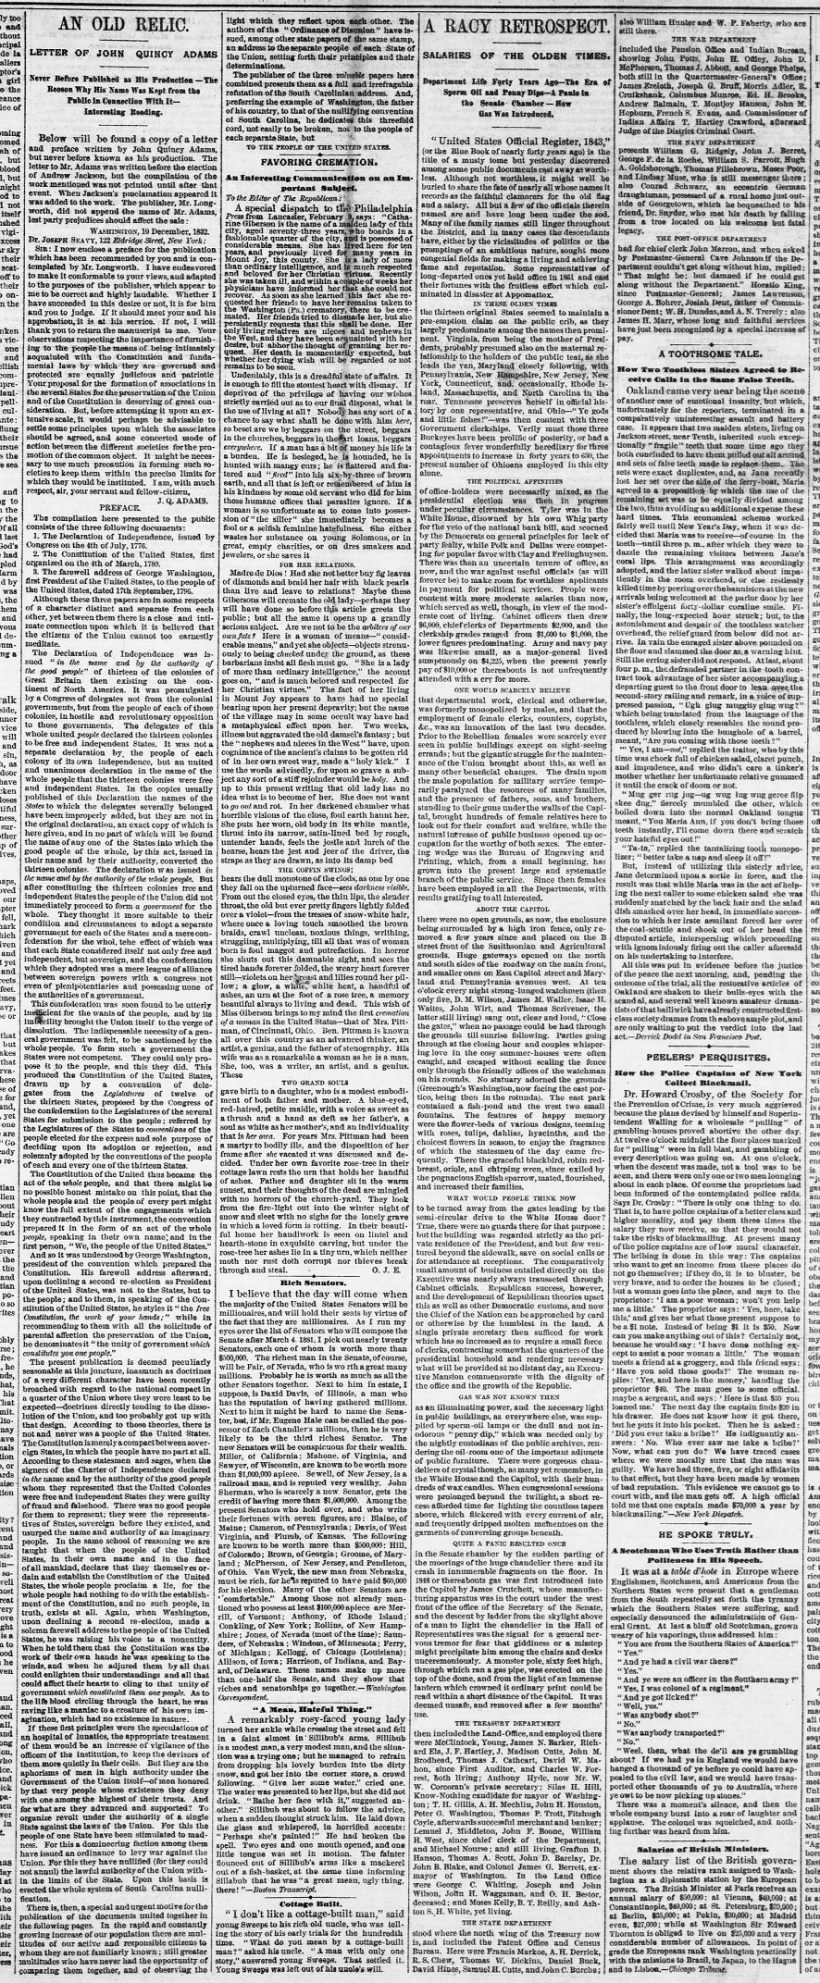 The National Republican, March  4, 1881, page 7